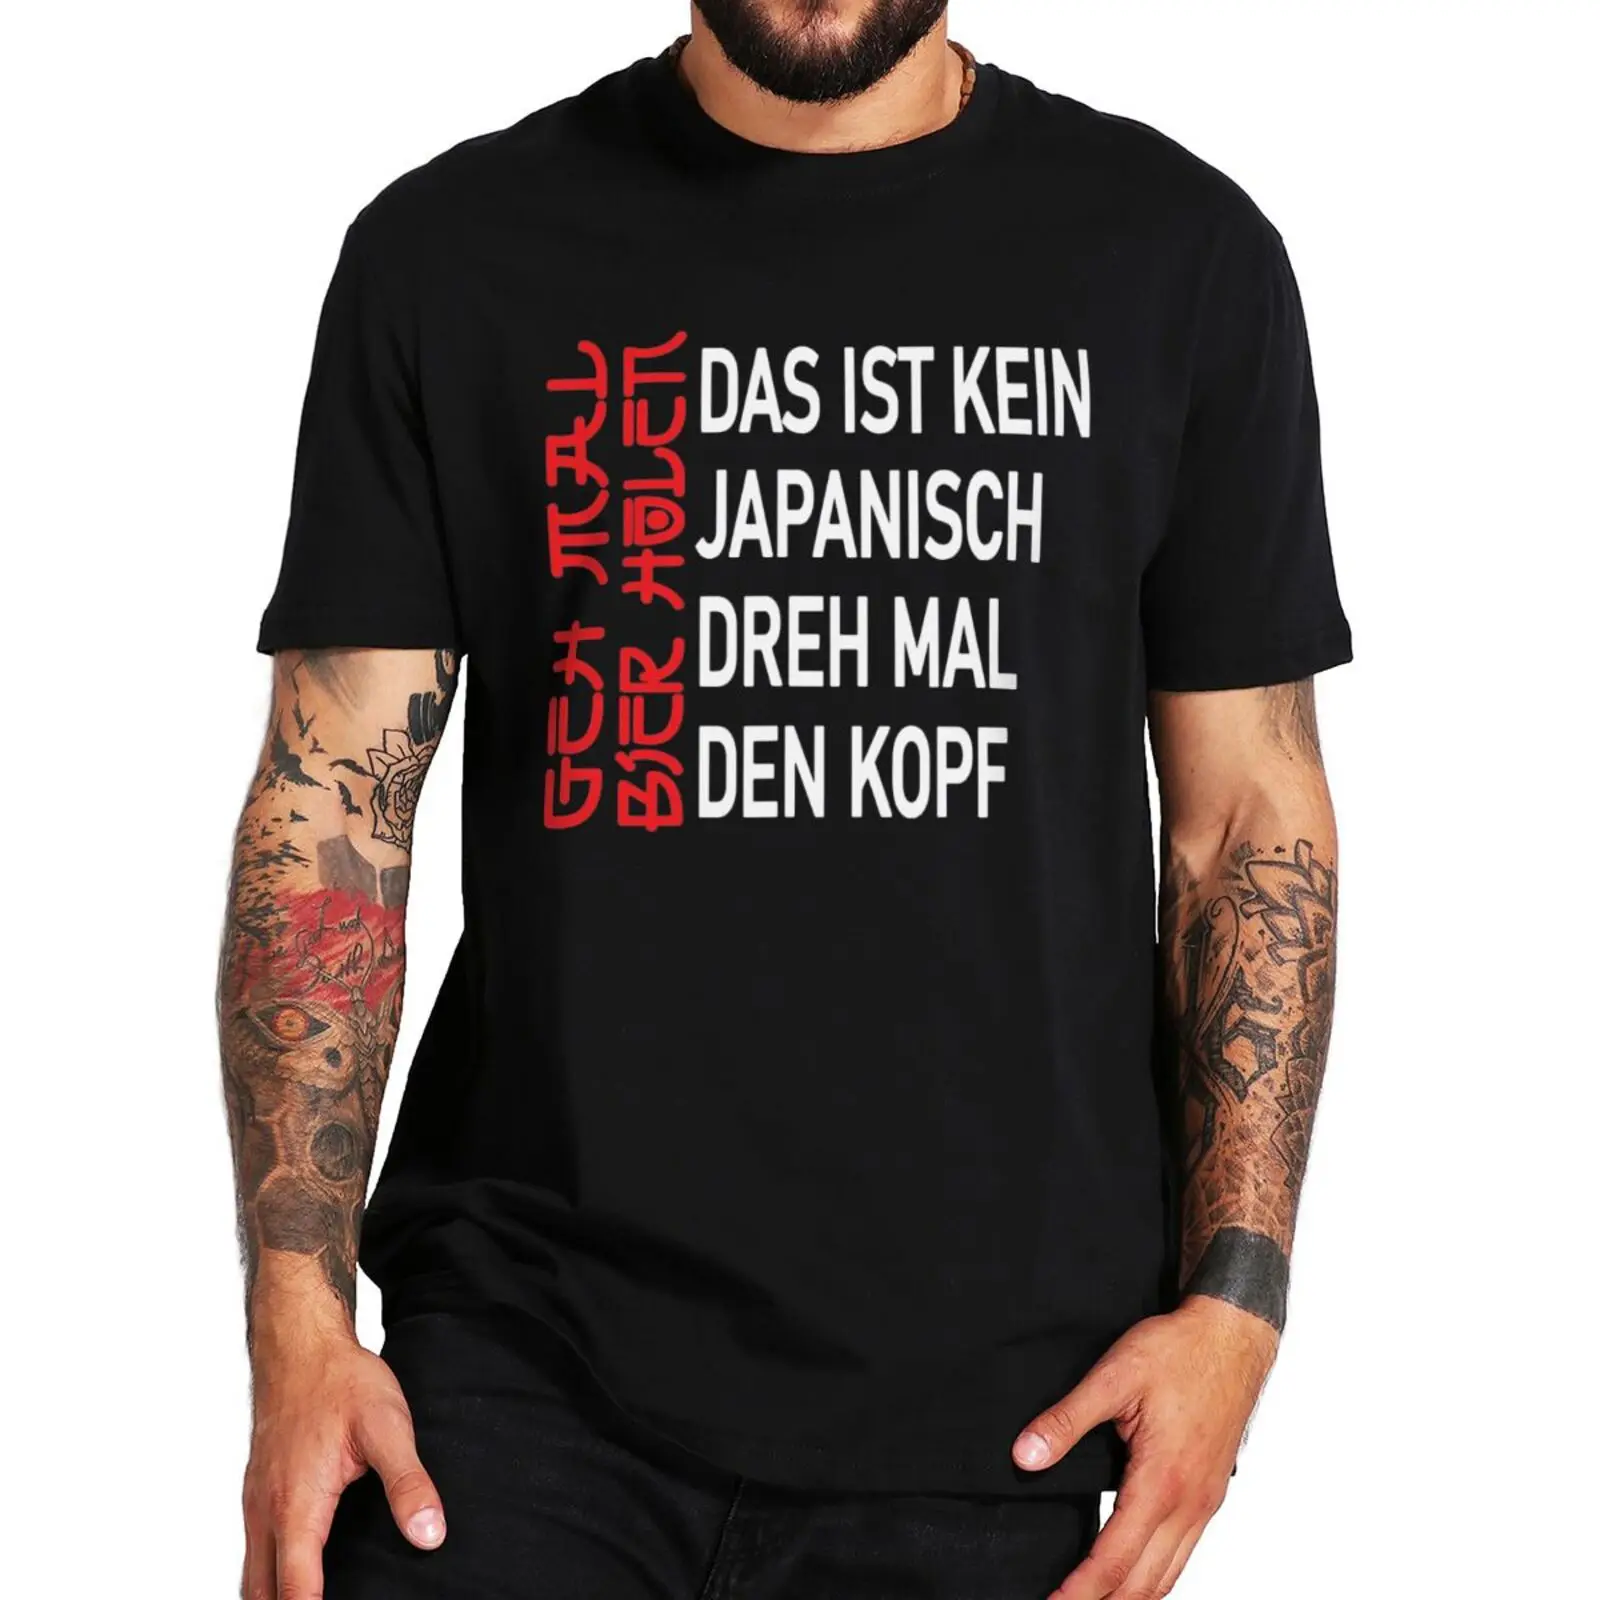 

Retro Get A Beer T Shirt Funny German Jokes Alcohol Drinkers Dad Gift Streetwear 100% Cotton Summer Casual T-shirts EU Size